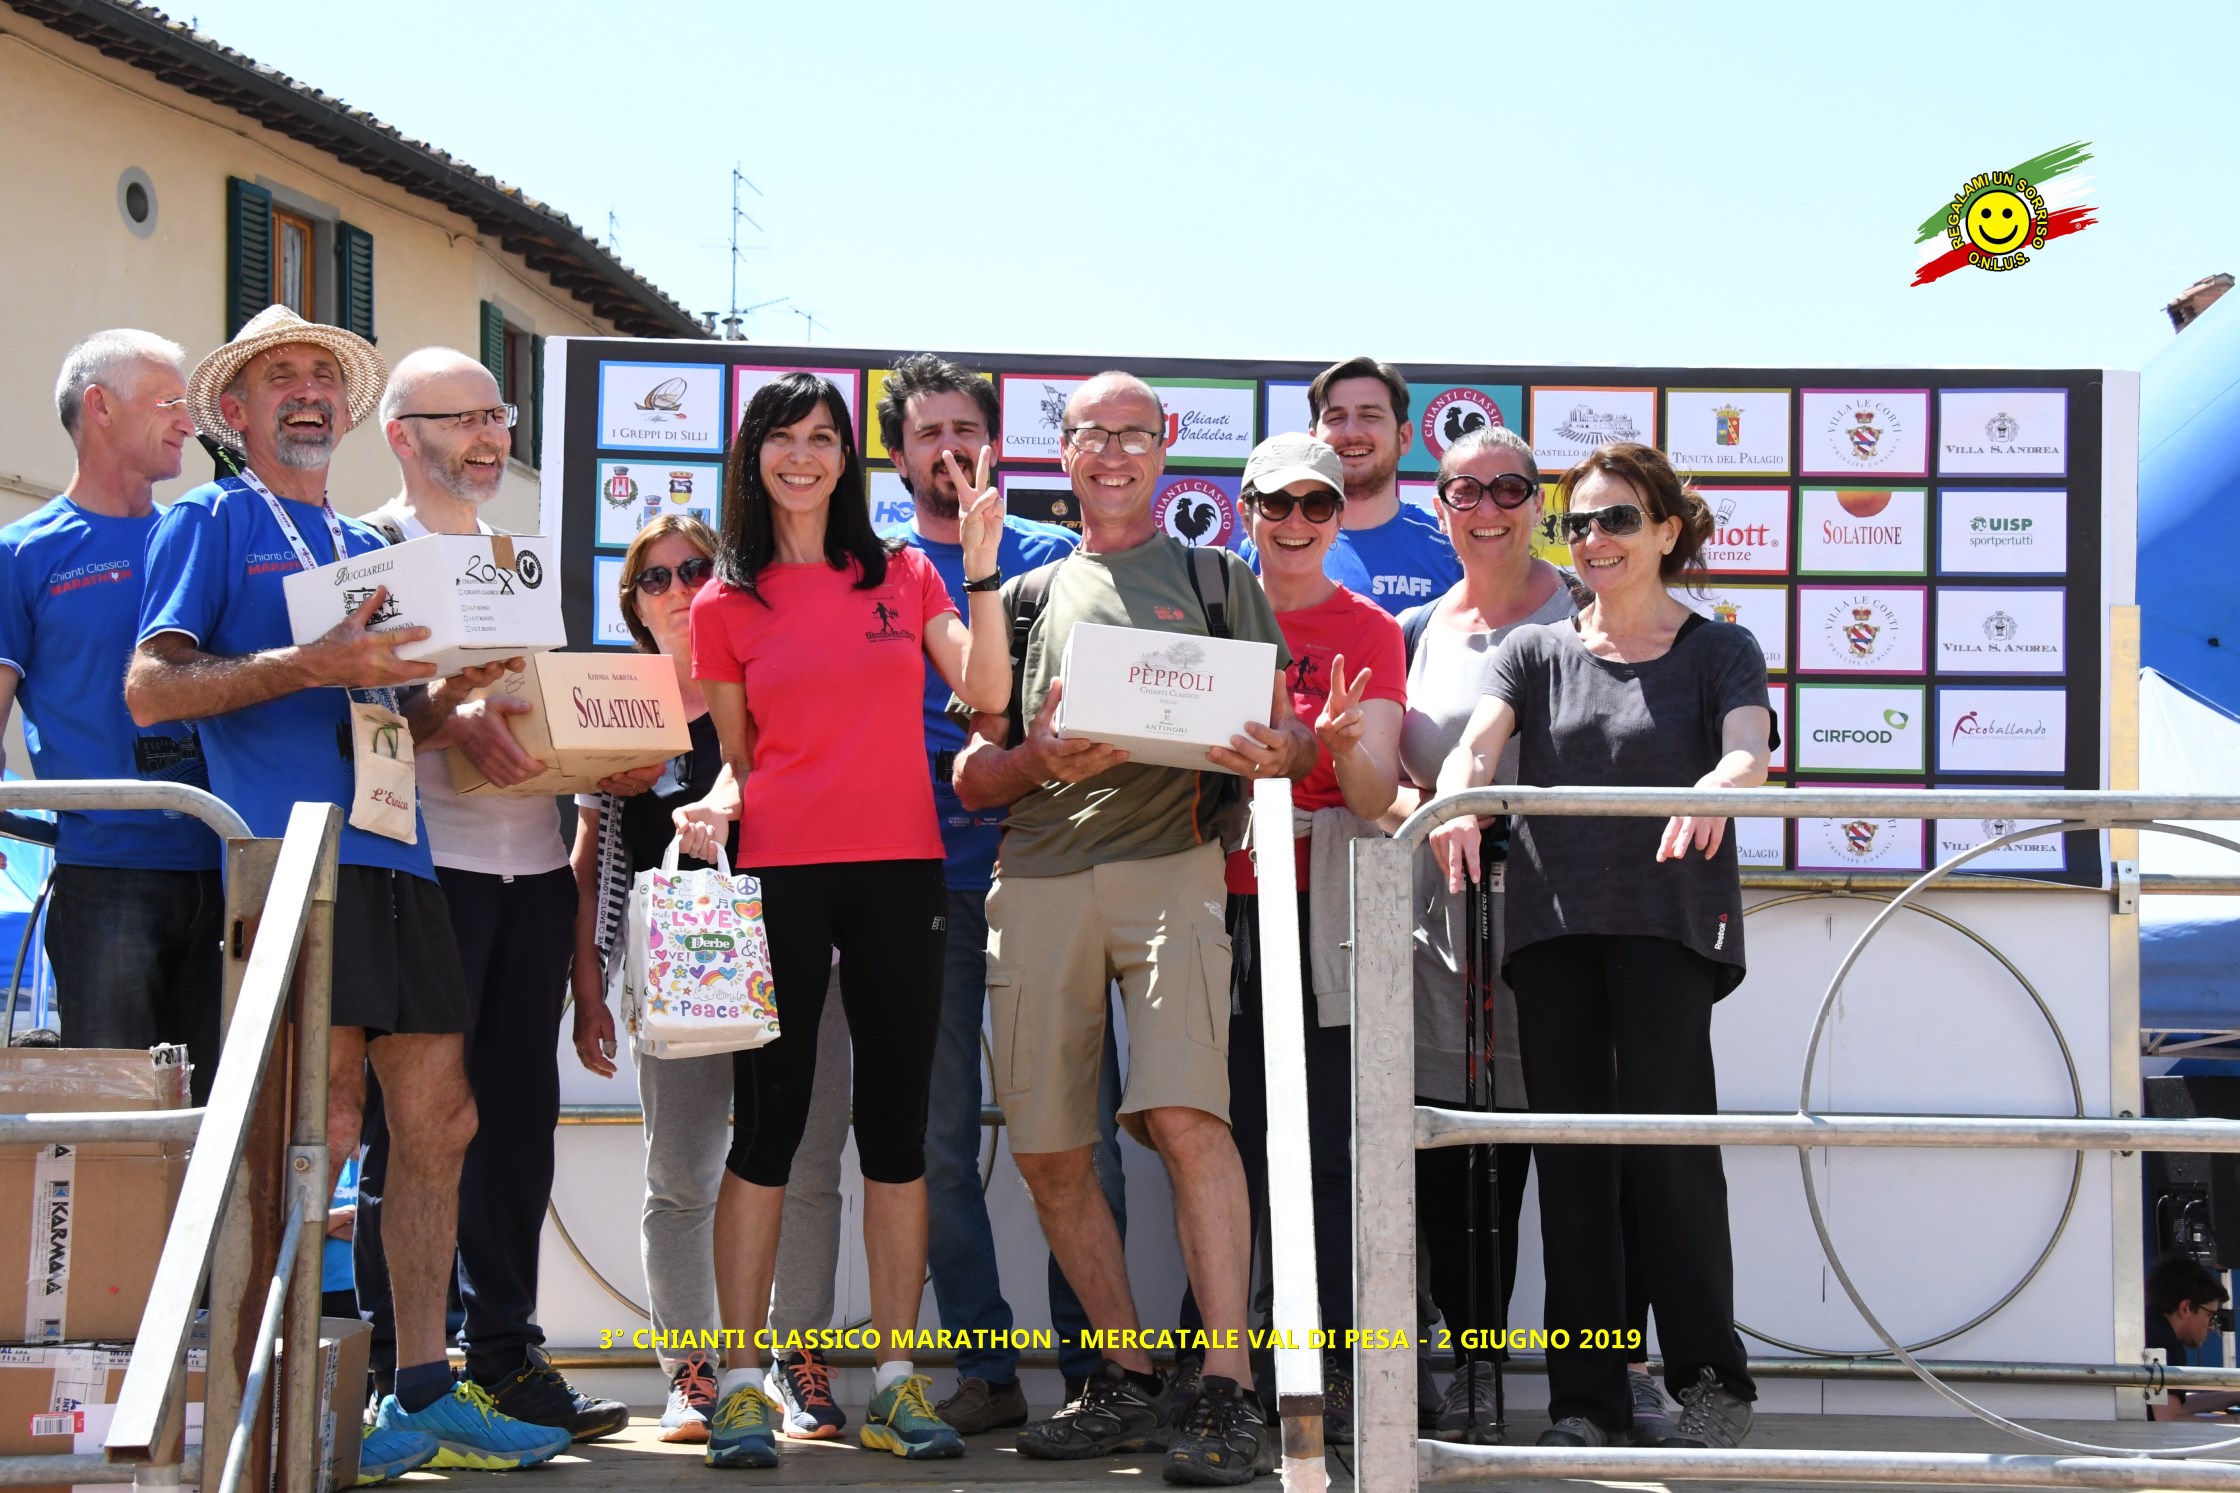 Awards to the first five athletes classifying of each category and to the companies with the most registered athletes